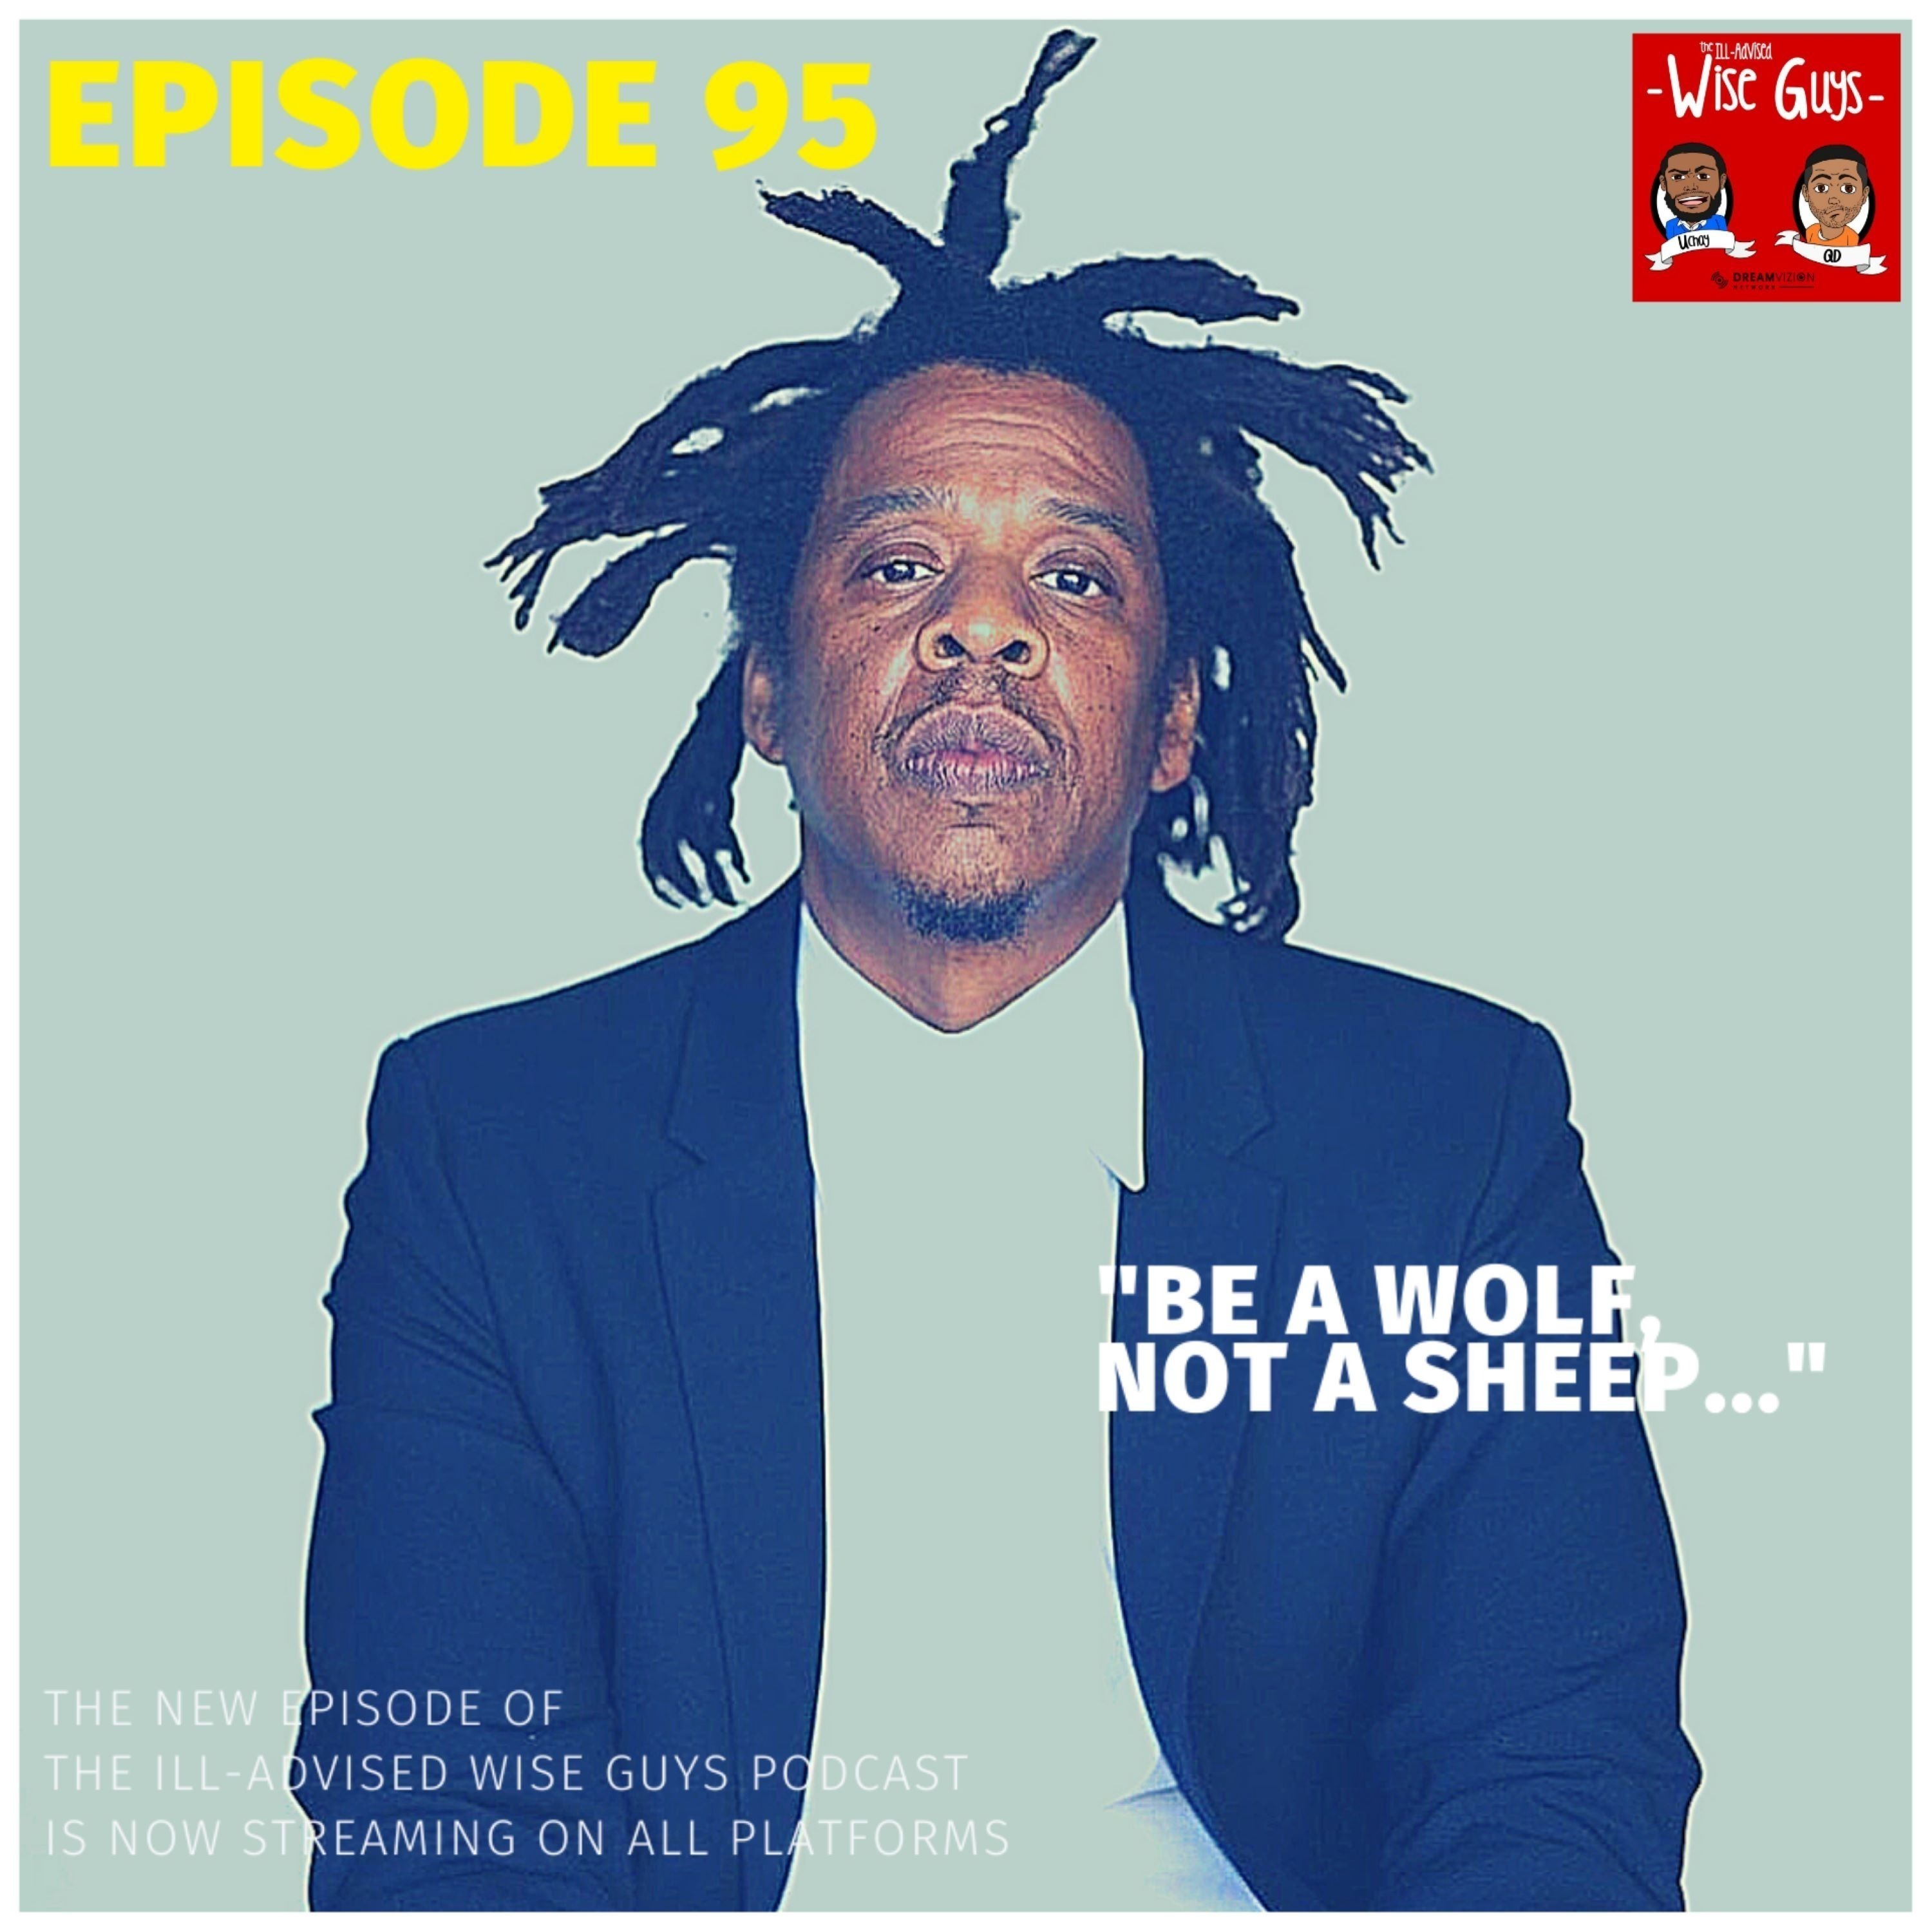 Episode 95 - "Be a Wolf, Not a Sheep..." Image